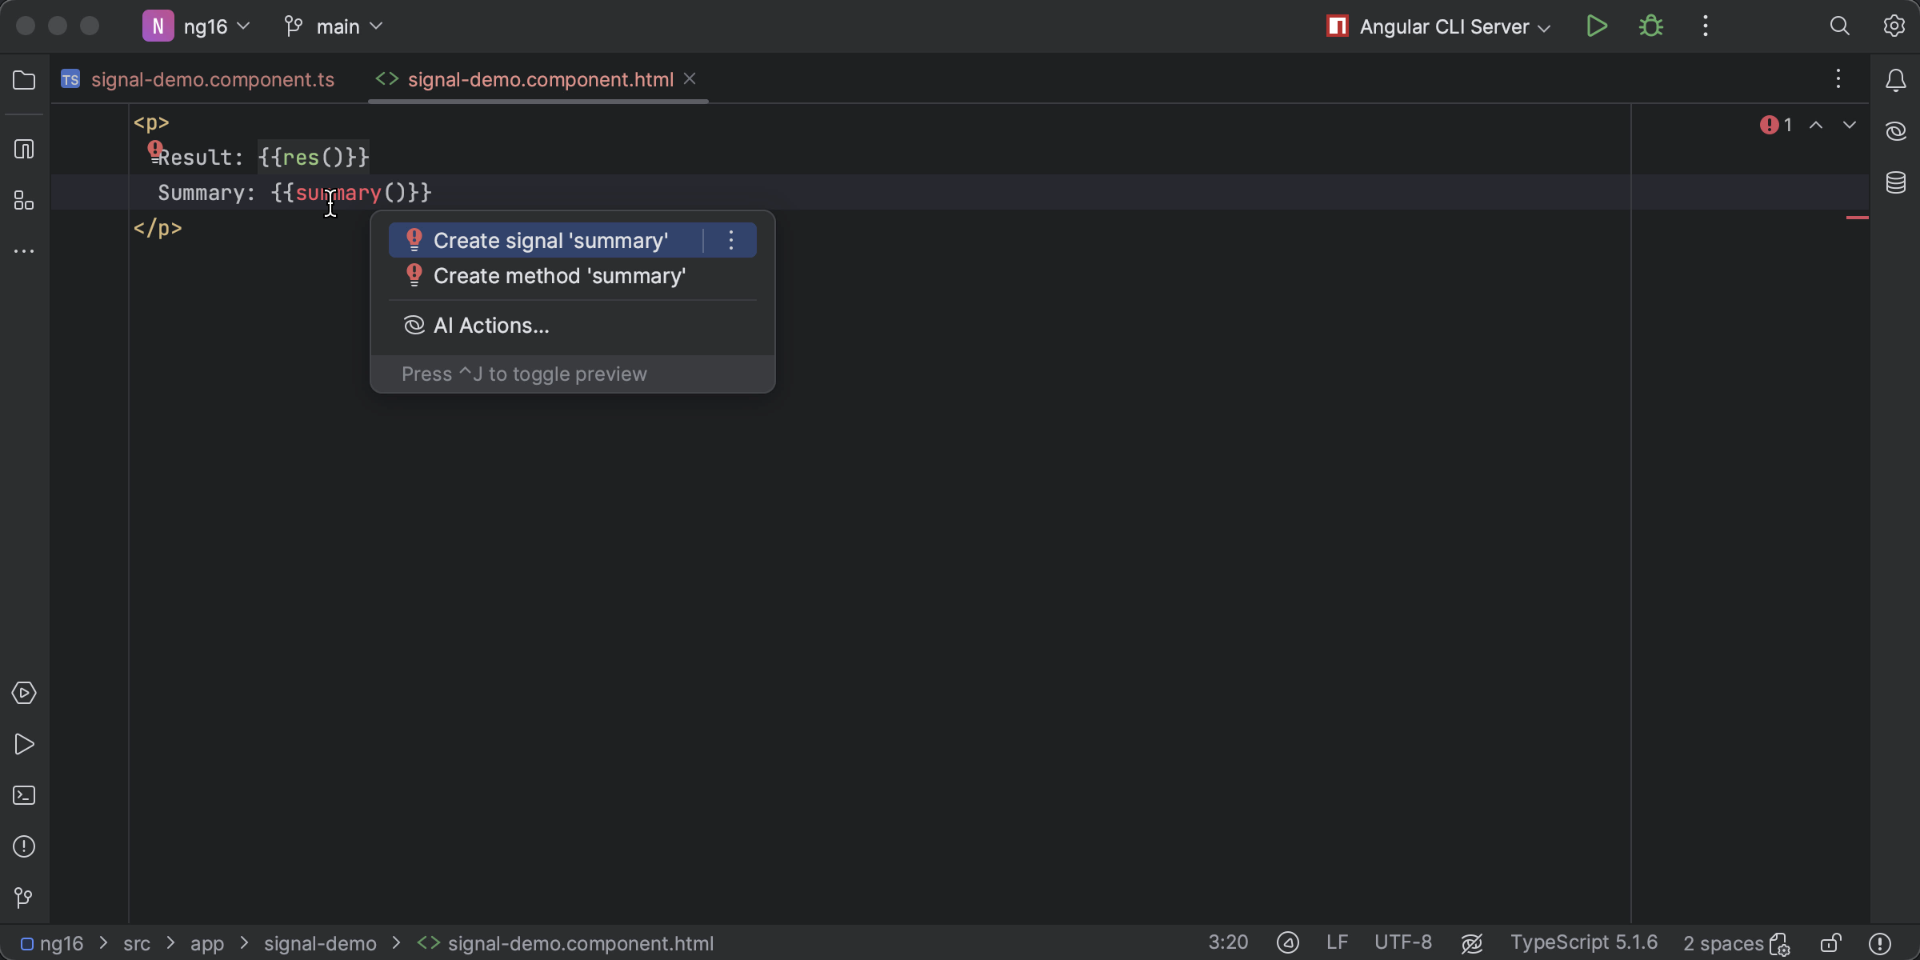 Image demonstrating the support for Angular signals in WebStorm 2023.3